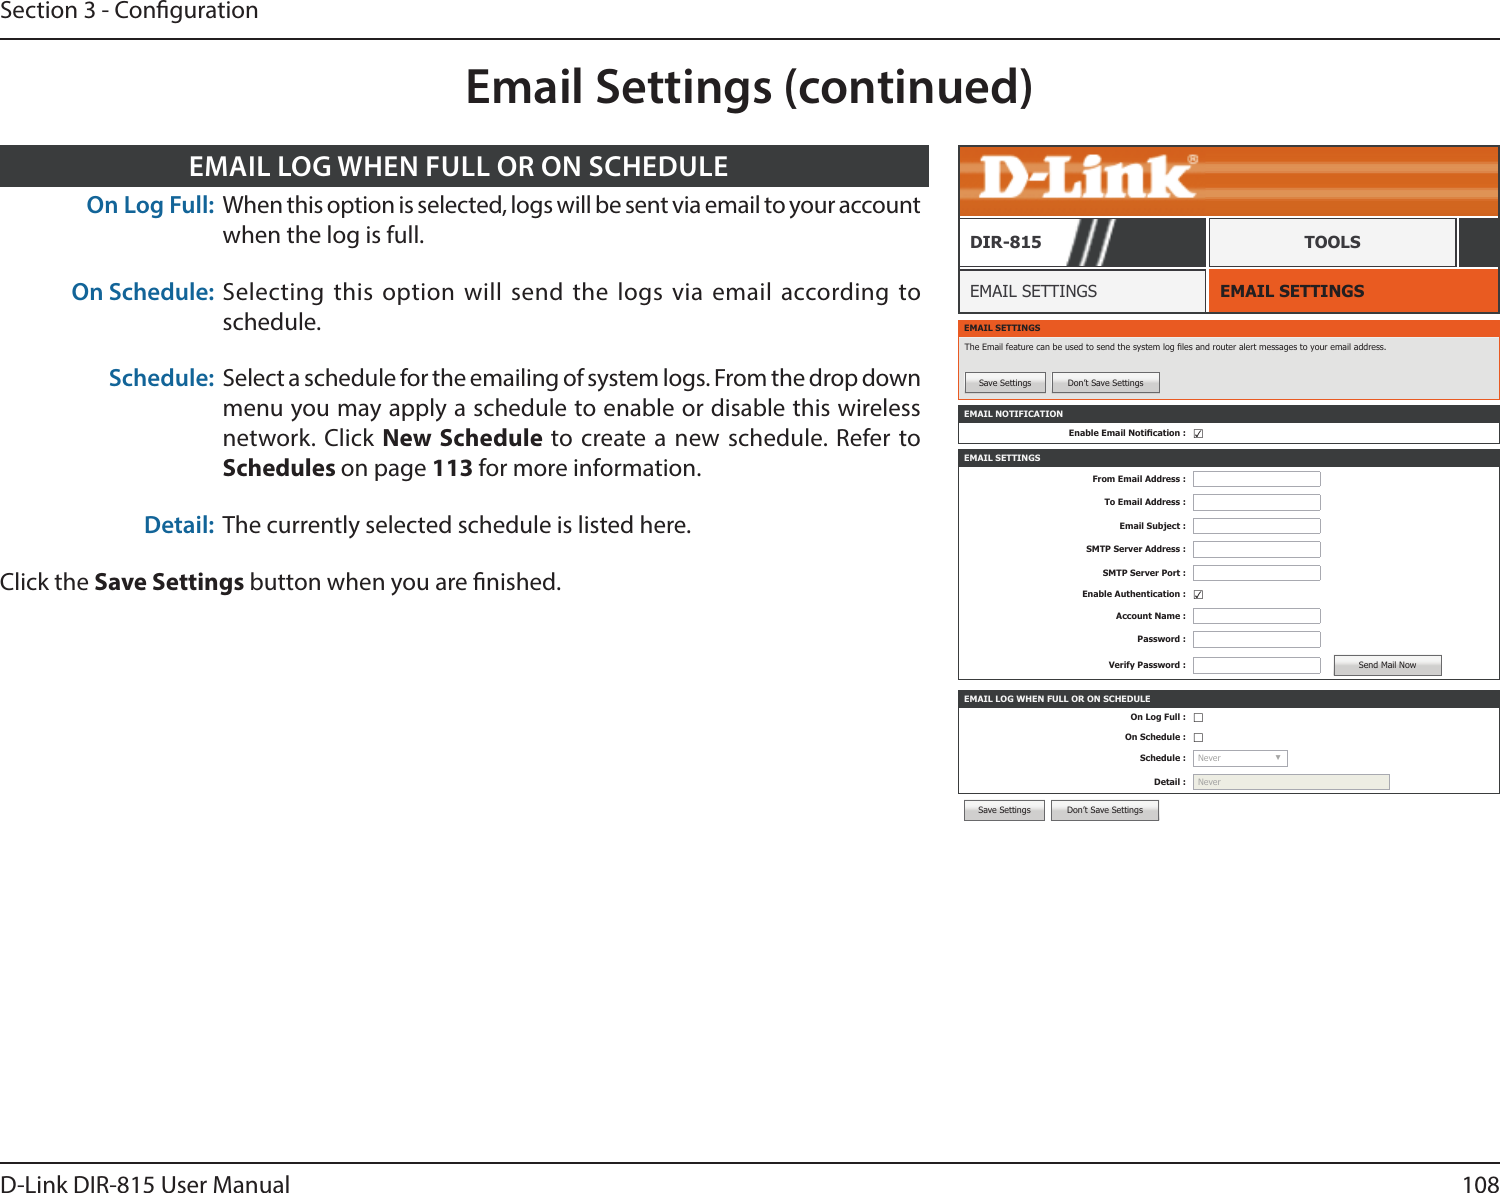 108D-Link DIR-815 User ManualSection 3 - CongurationEMAIL SETTINGSEMAIL SETTINGSDIR-815 TOOLSEMAIL SETTINGSThe Email feature can be used to send the system log les and router alert messages to your email address.Save Settings Don’t Save SettingsEMAIL NOTIFICATIONEnable Email Notication : ☑EMAIL SETTINGSFrom Email Address :To Email Address :Email Subject :SMTP Server Address :SMTP Server Port :Enable Authentication : ☑Account Name :Password :Verify Password : Send Mail NowEMAIL LOG WHEN FULL OR ON SCHEDULEOn Log Full : ☐On Schedule : ☐Schedule : Never  ▼Detail : NeverSave Settings Don’t Save SettingsEmail Settings (continued)On Log Full: When this option is selected, logs will be sent via email to your account when the log is full.On Schedule: Selecting this option will send the logs via email according to schedule.Schedule: Select a schedule for the emailing of system logs. From the drop down menu you may apply a schedule to enable or disable this wireless network. Click New Schedule to create a new schedule. Refer to Schedules on page 113 for more information.Detail: The currently selected schedule is listed here.Click the Save Settings button when you are nished.EMAIL LOG WHEN FULL OR ON SCHEDULE